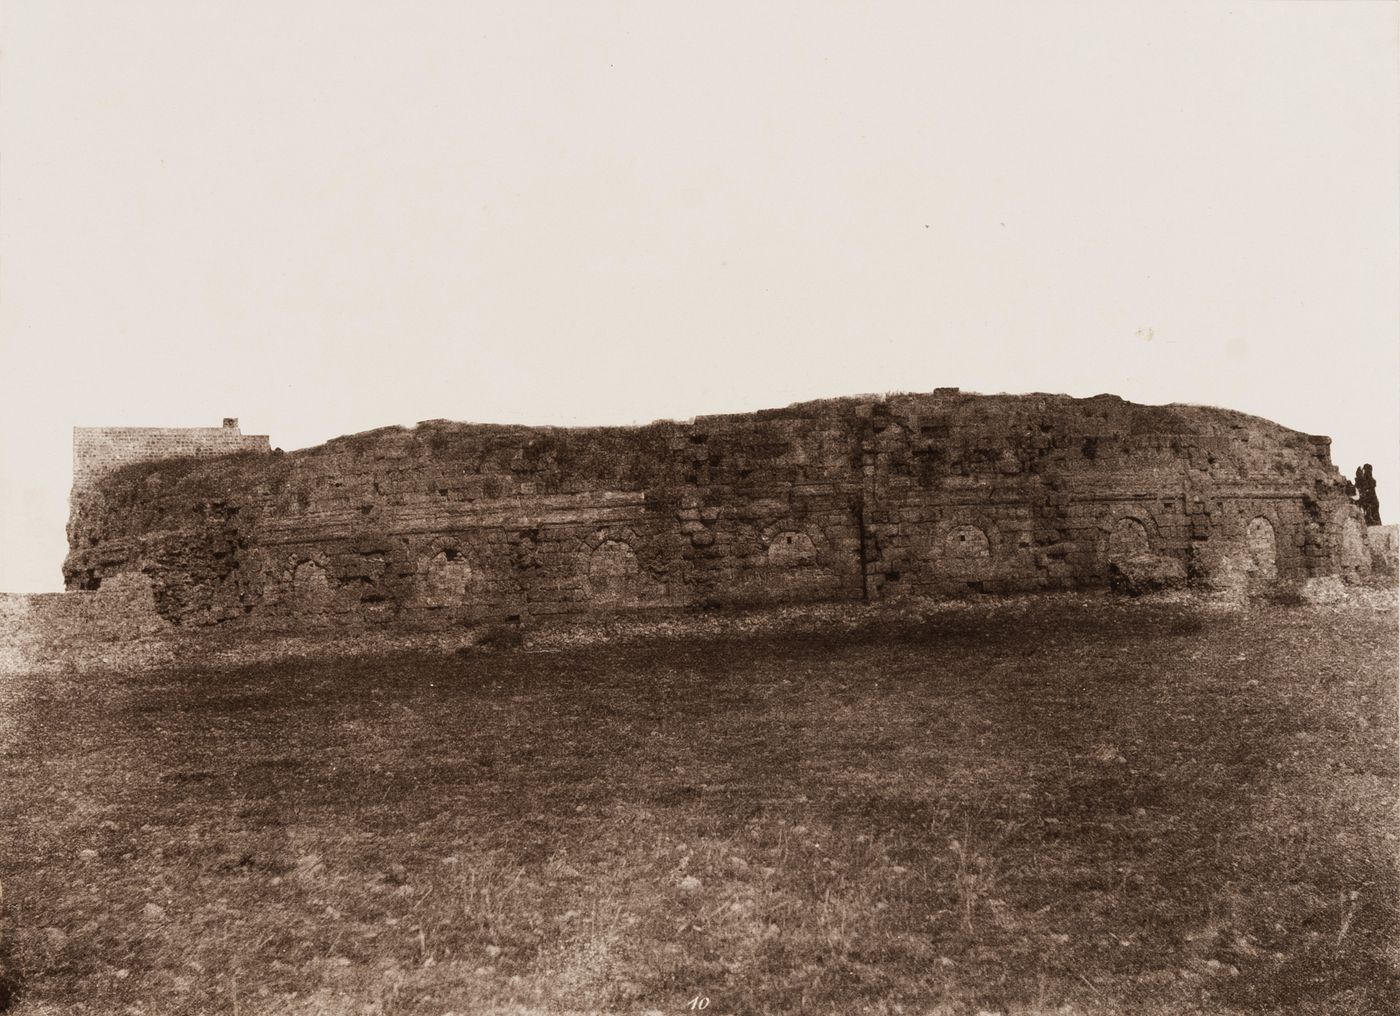 View of the ruins of the exterior wall of a Roman amphitheater, Jebel ed Druz, Ottoman Empire (now in Syria)